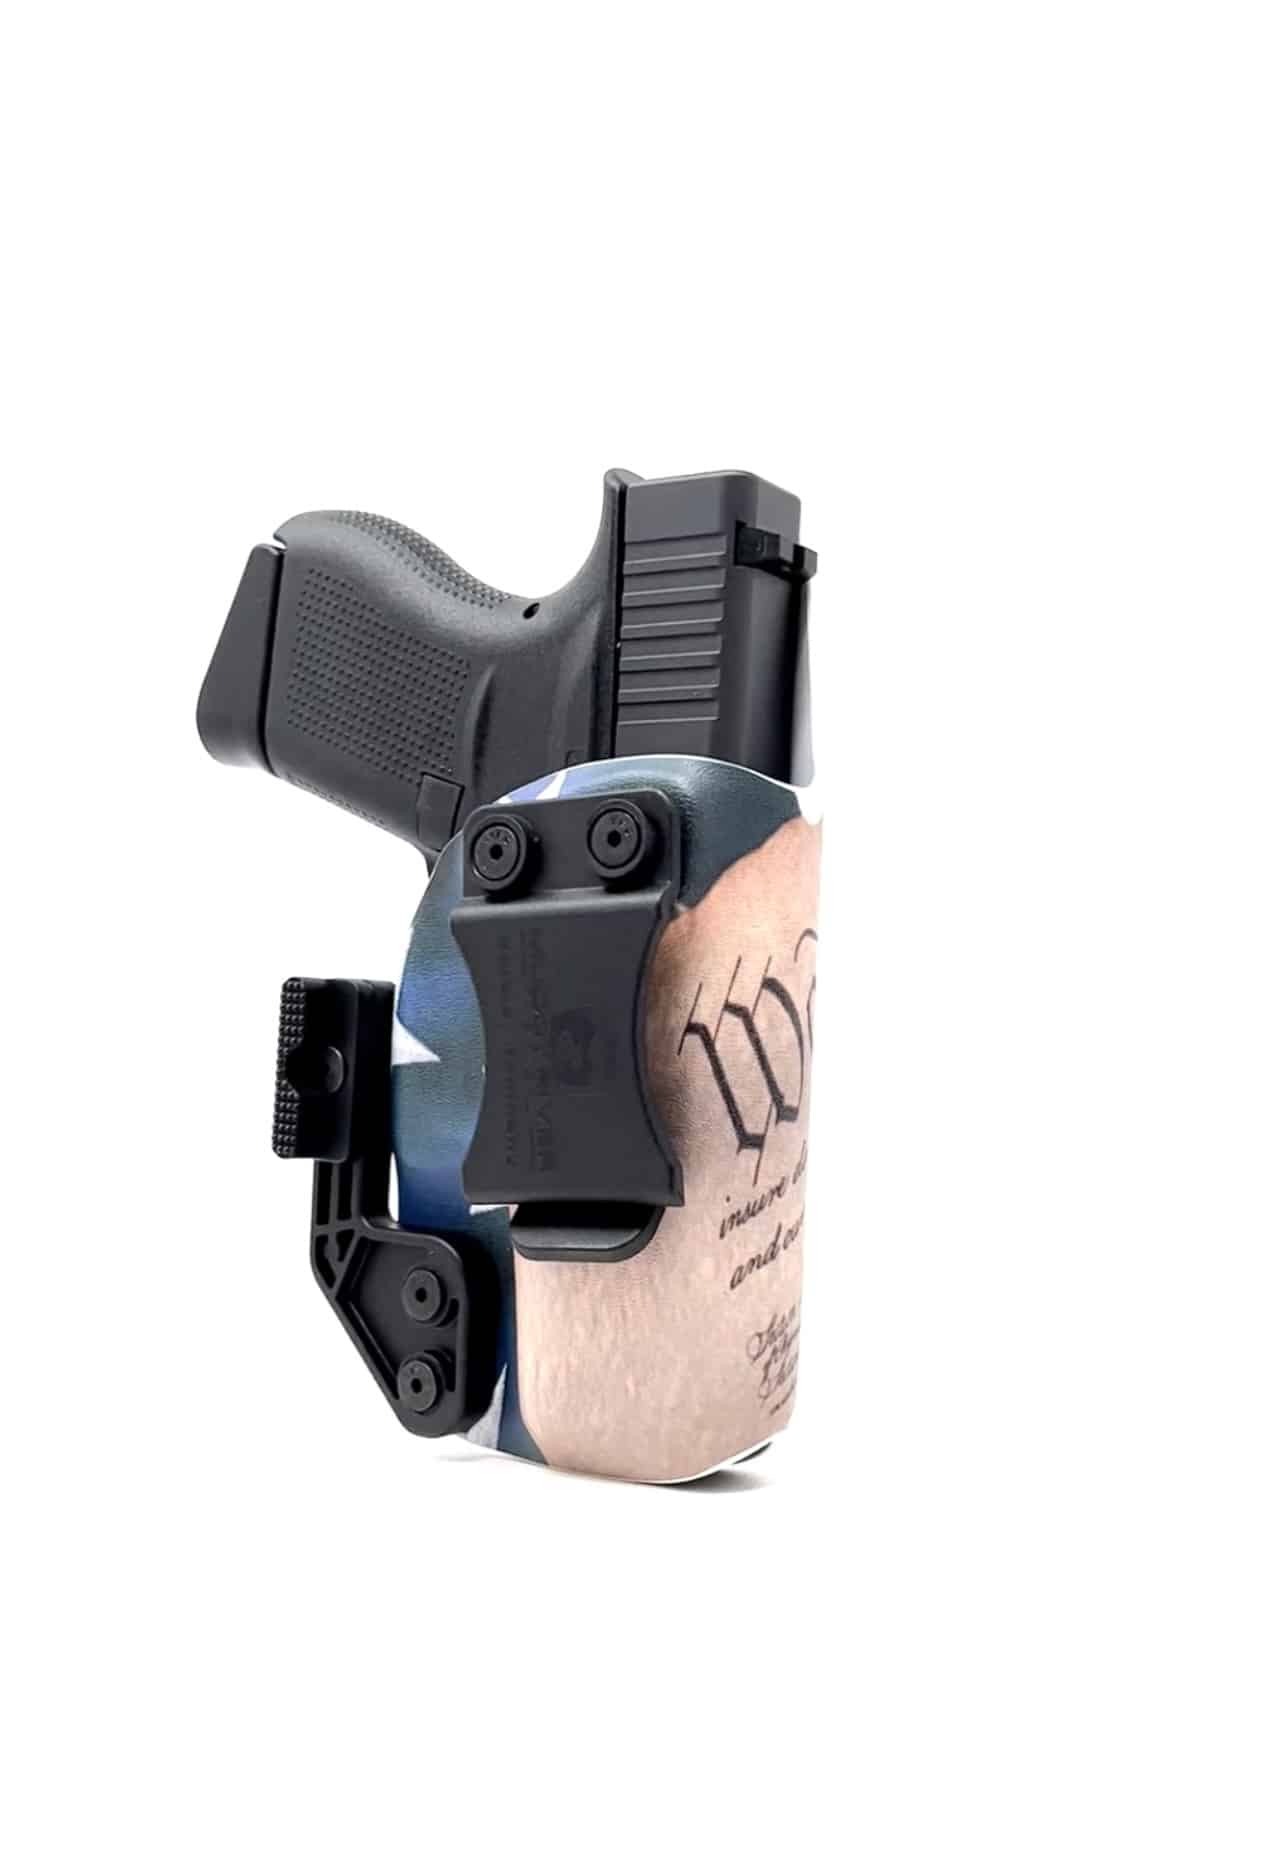 SIG P238 Zero Carry Elite In Waistband Holster for concealed carry 